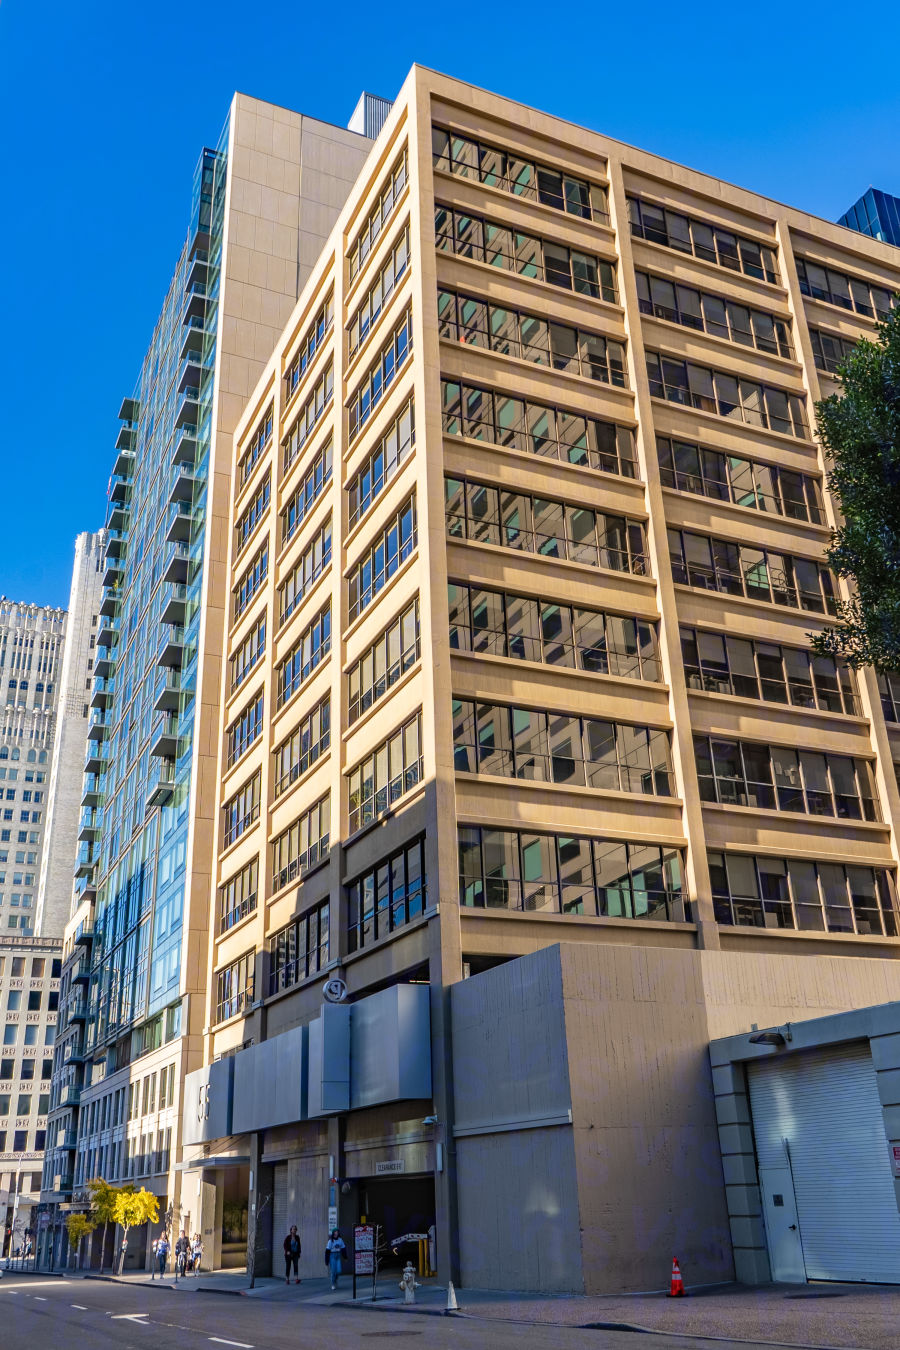 55 Hawthorne Street, San Francisco, CA Office Space for Rent | VTS